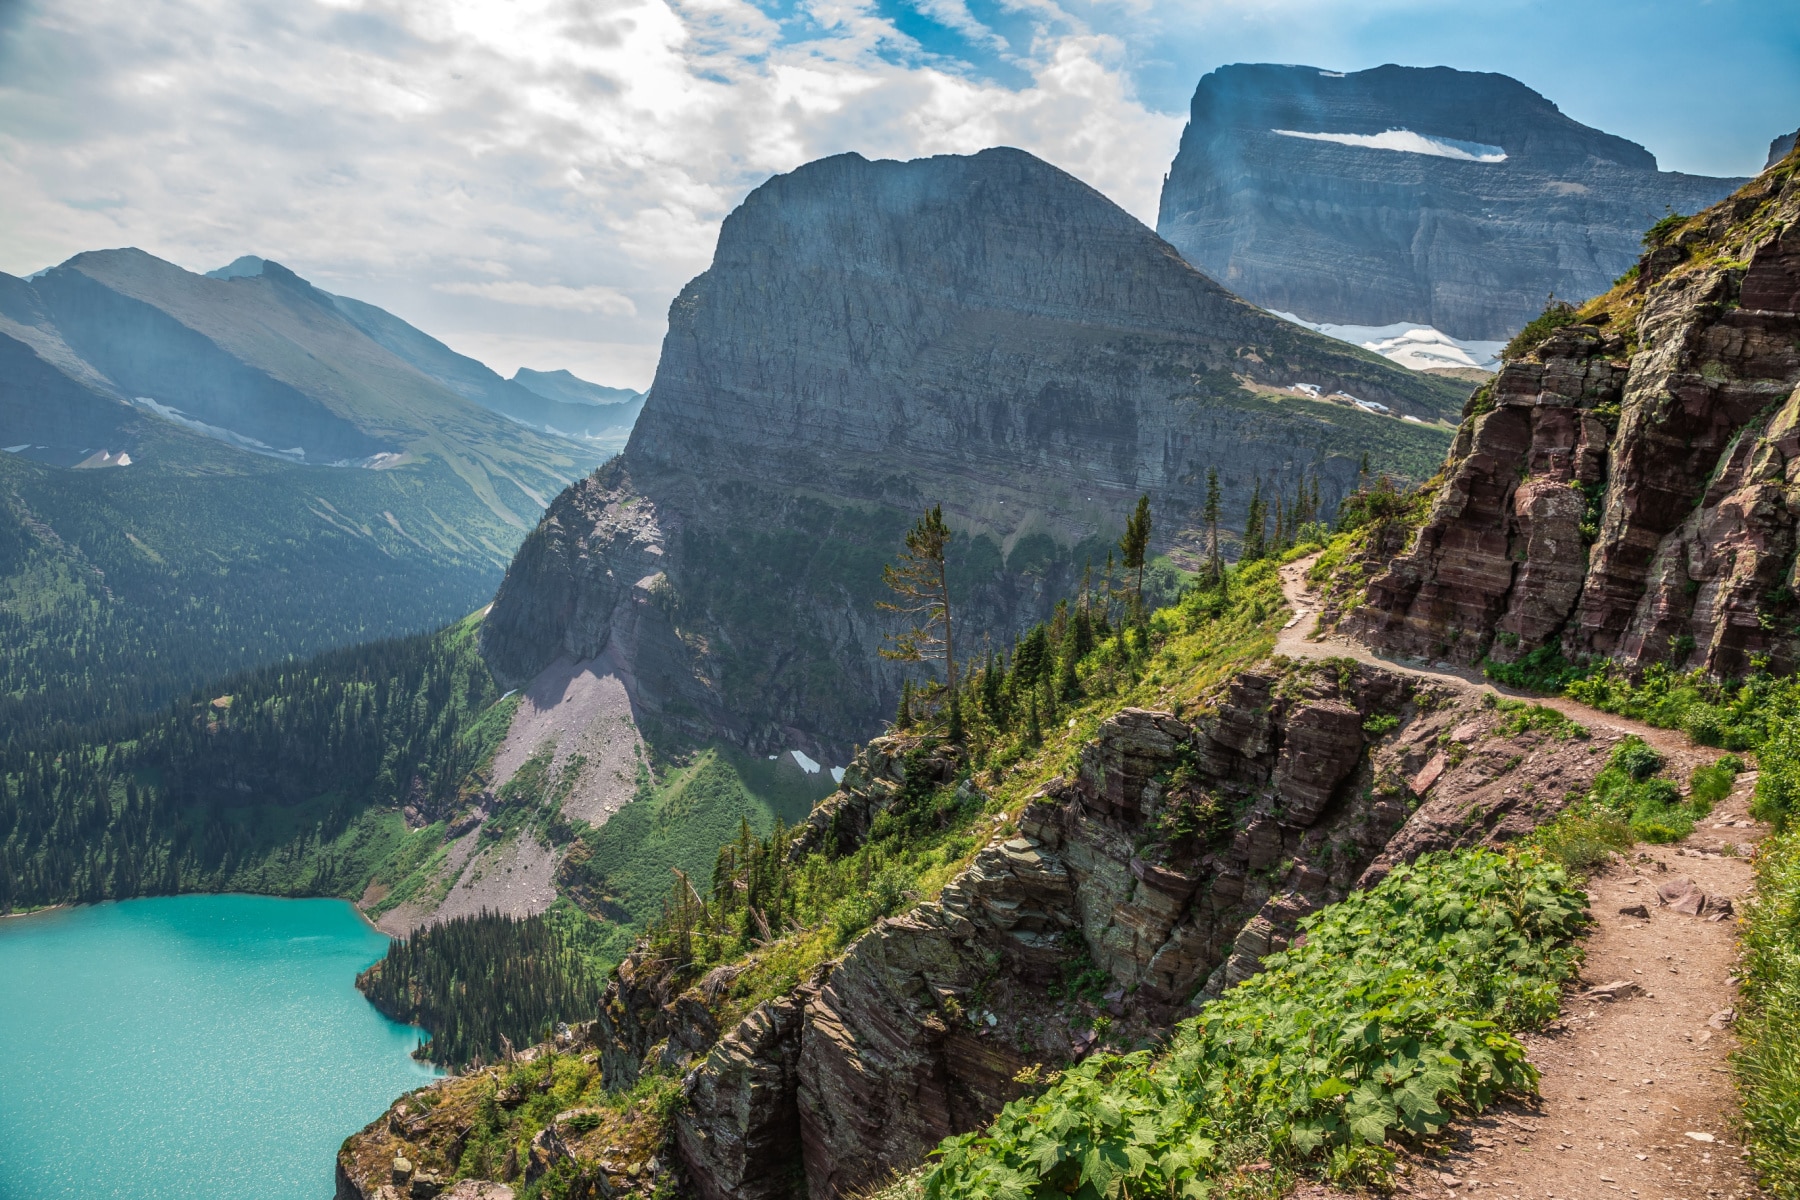 Stunning Trail Views of Grinnell Lake on the Grinnell Glacier Trail at Glacier National Park, Montana